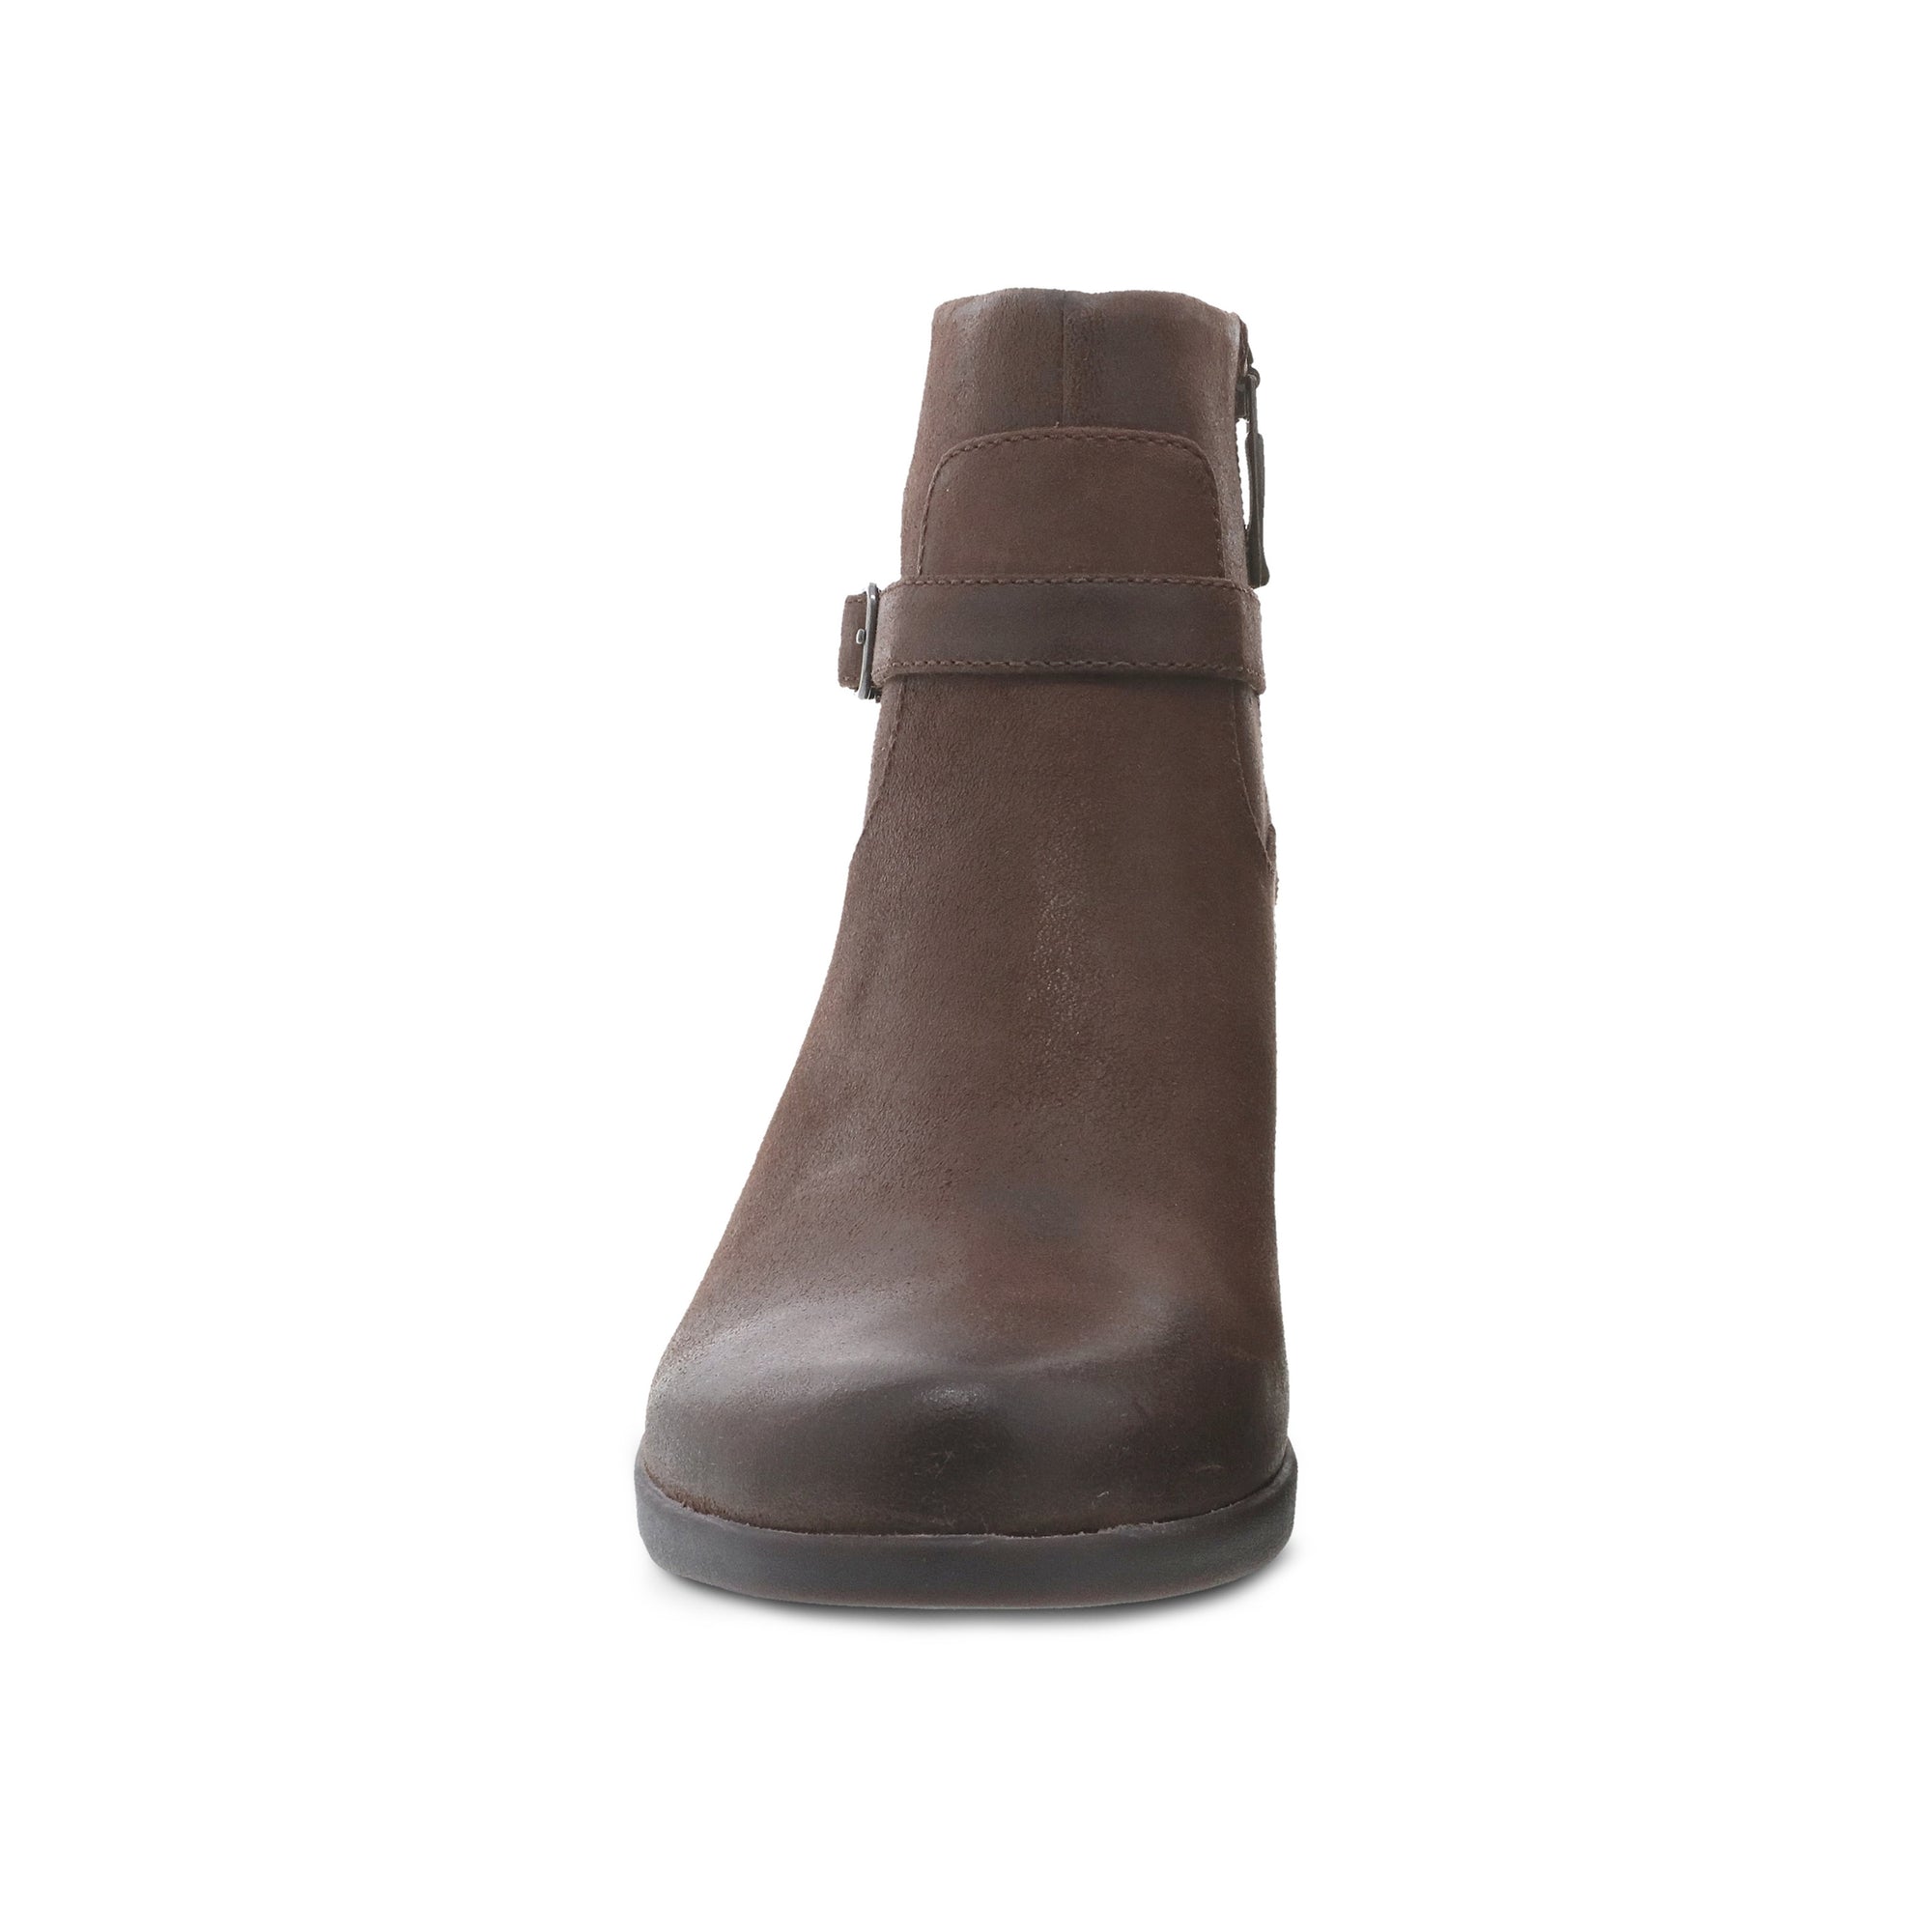 Mid-shaft boot shown from front to highlight shape and high-quality leather.